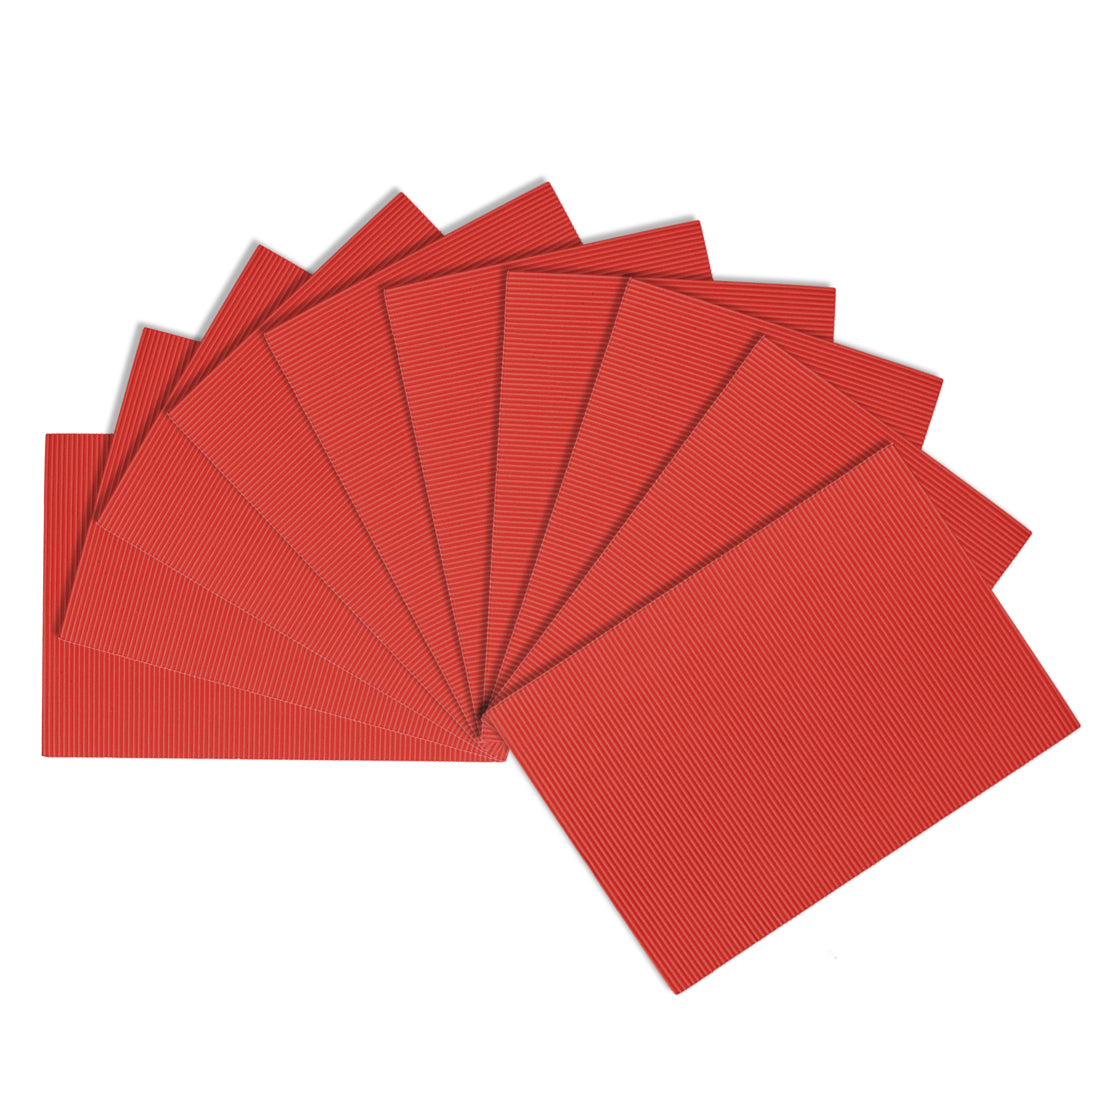 uxcell Uxcell 10pcs Corrugated Cardboard Paper Sheets,Red,7.87-inch  x 11.81-inch